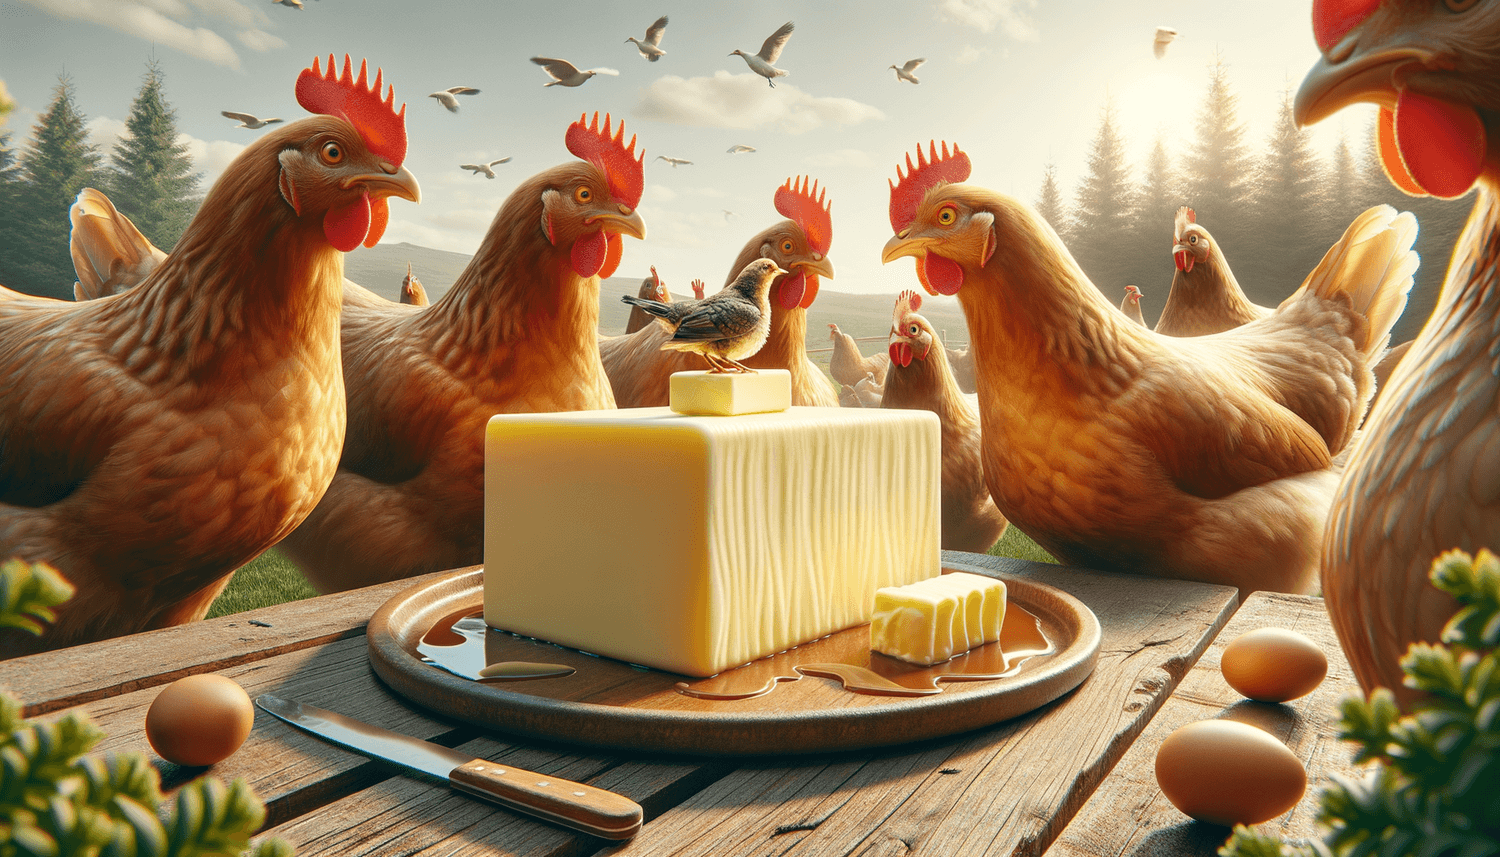 Can Chickens Eat Butter?